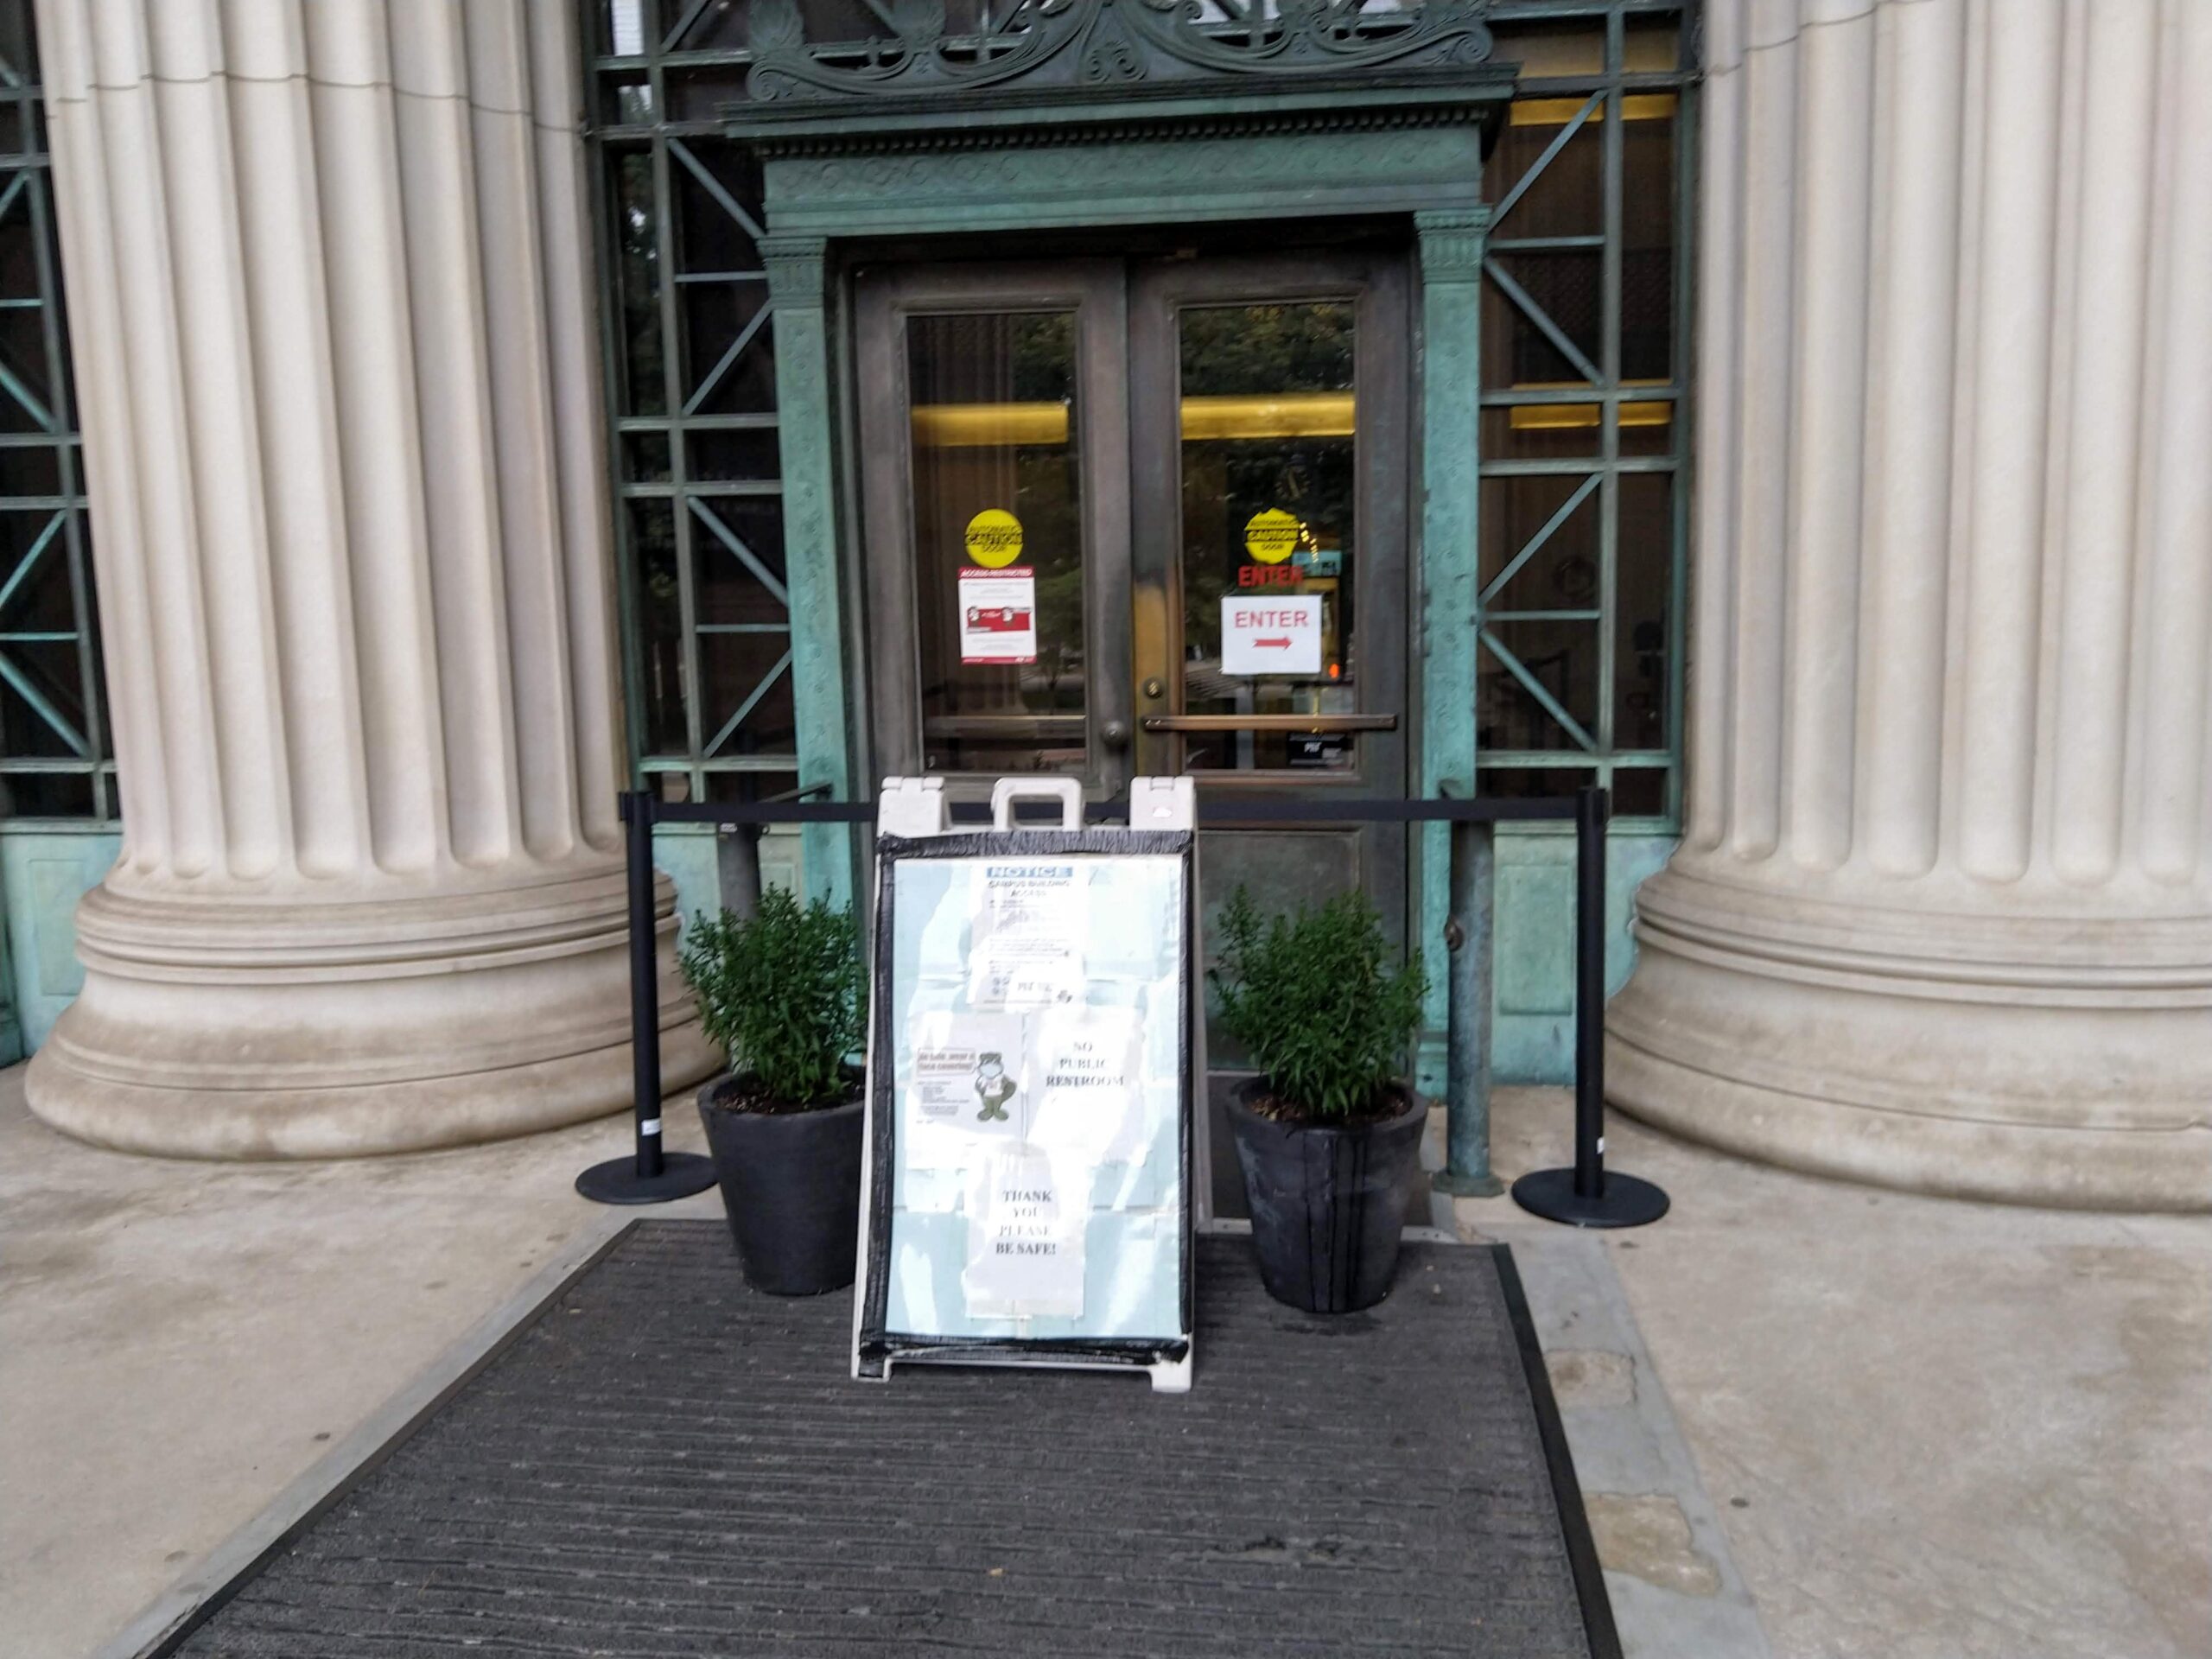 the door going into lobby 7, surrounded by two pillars, with stanchions, plants, and a sign blocking it